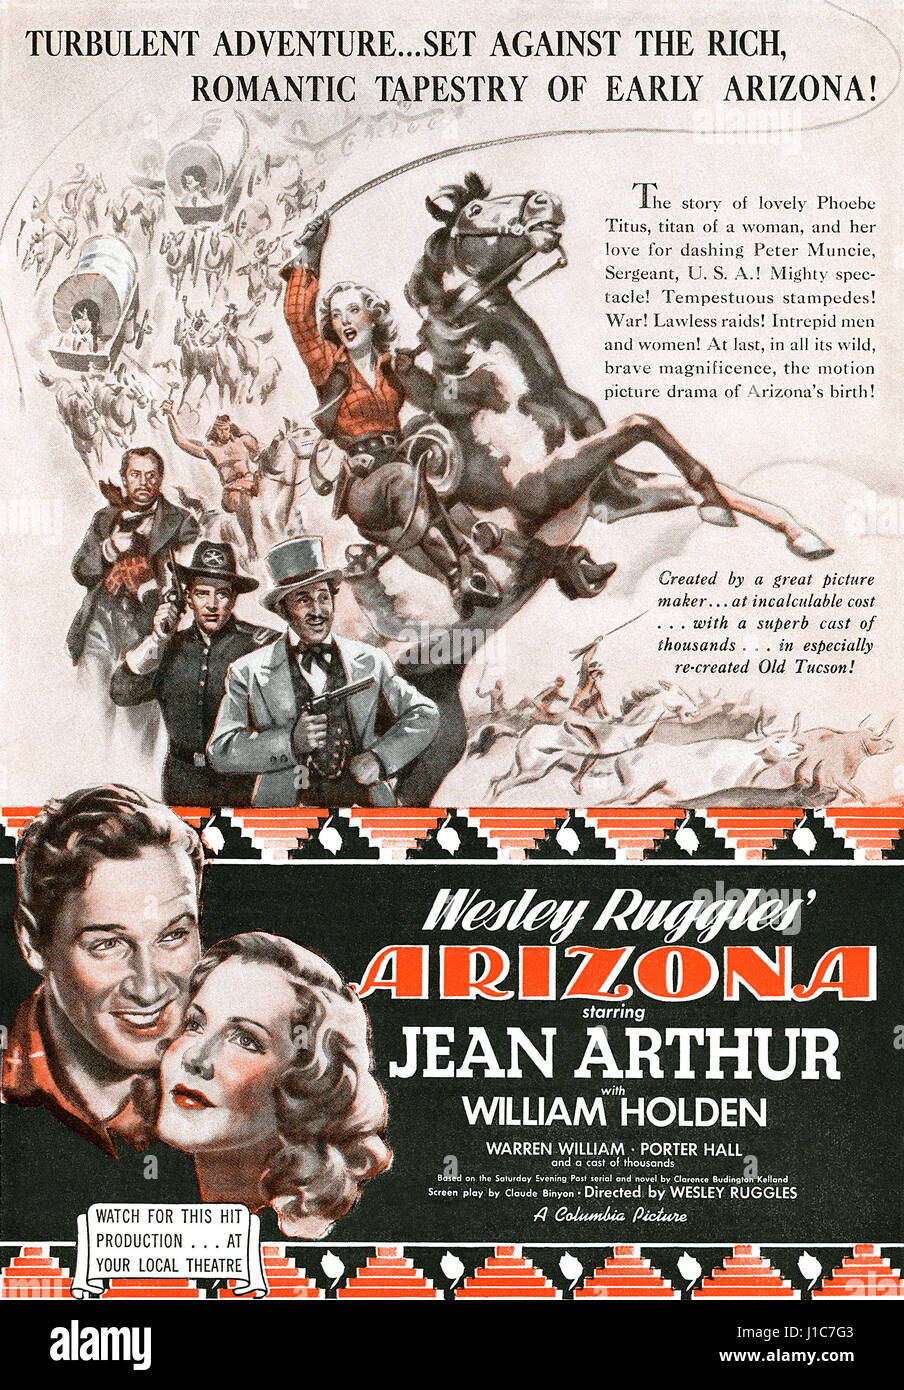 1940 U.S. advertisement for the film Arizona starring Jean Arthur and William Holden. Stock Photo